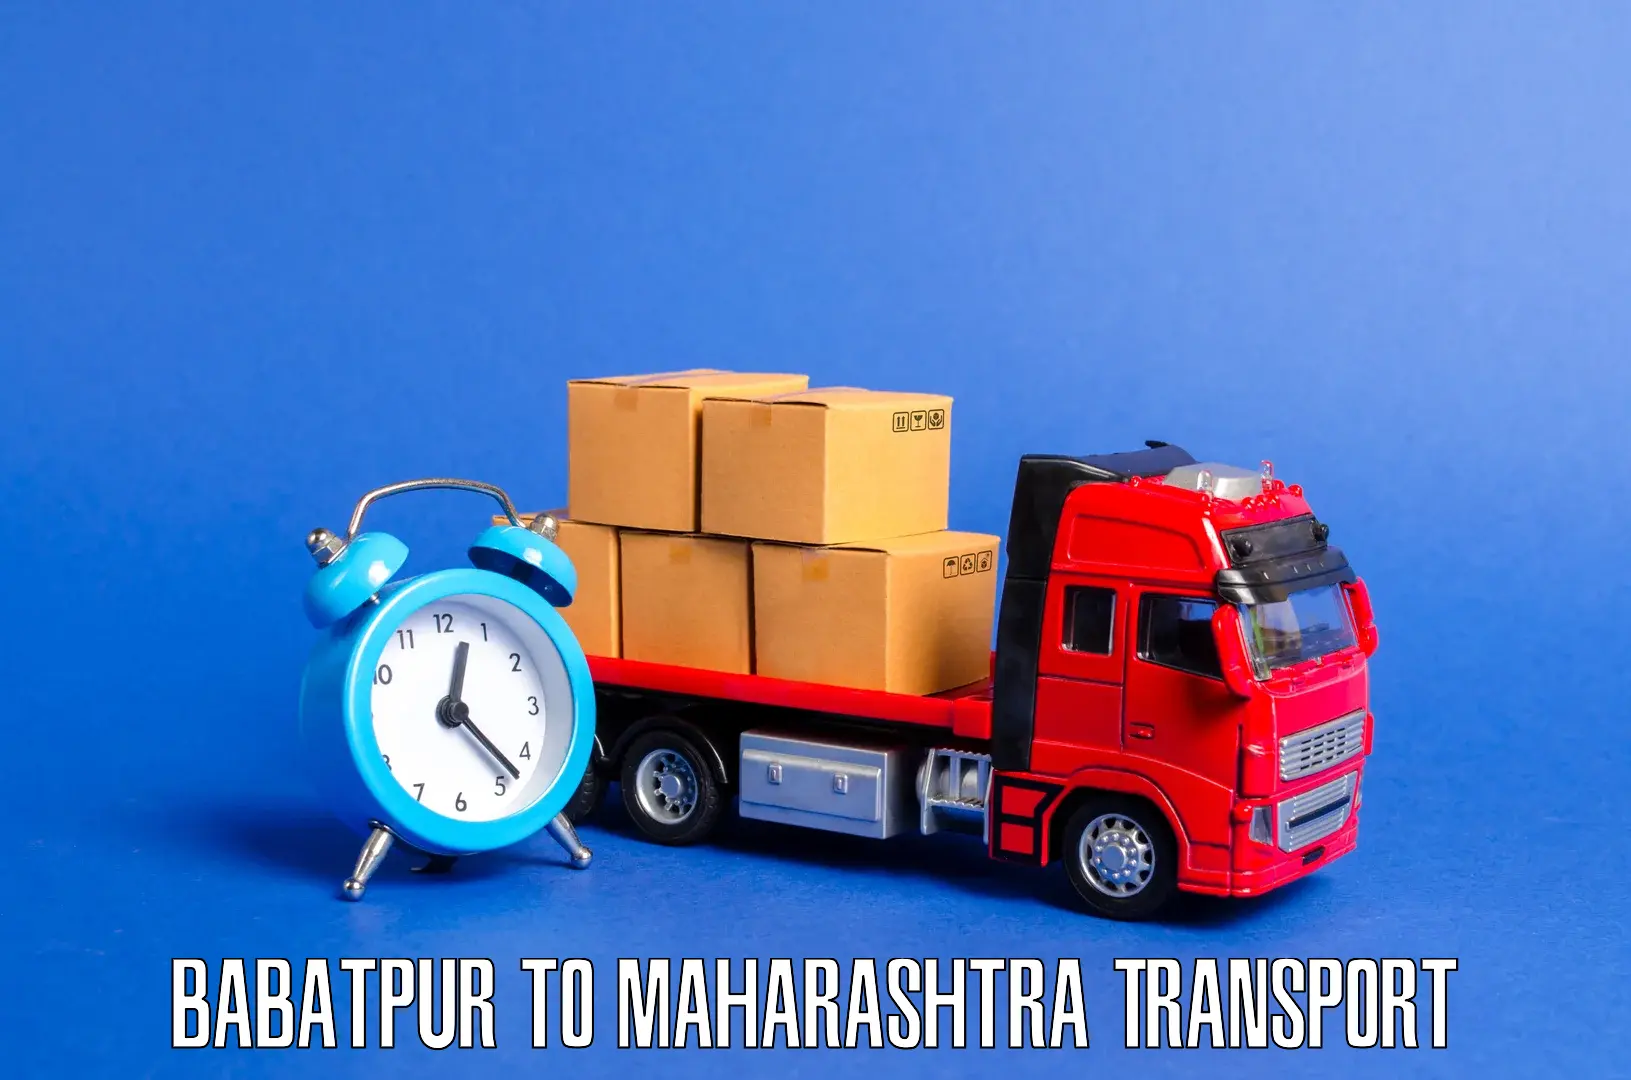 Nationwide transport services Babatpur to Alibag